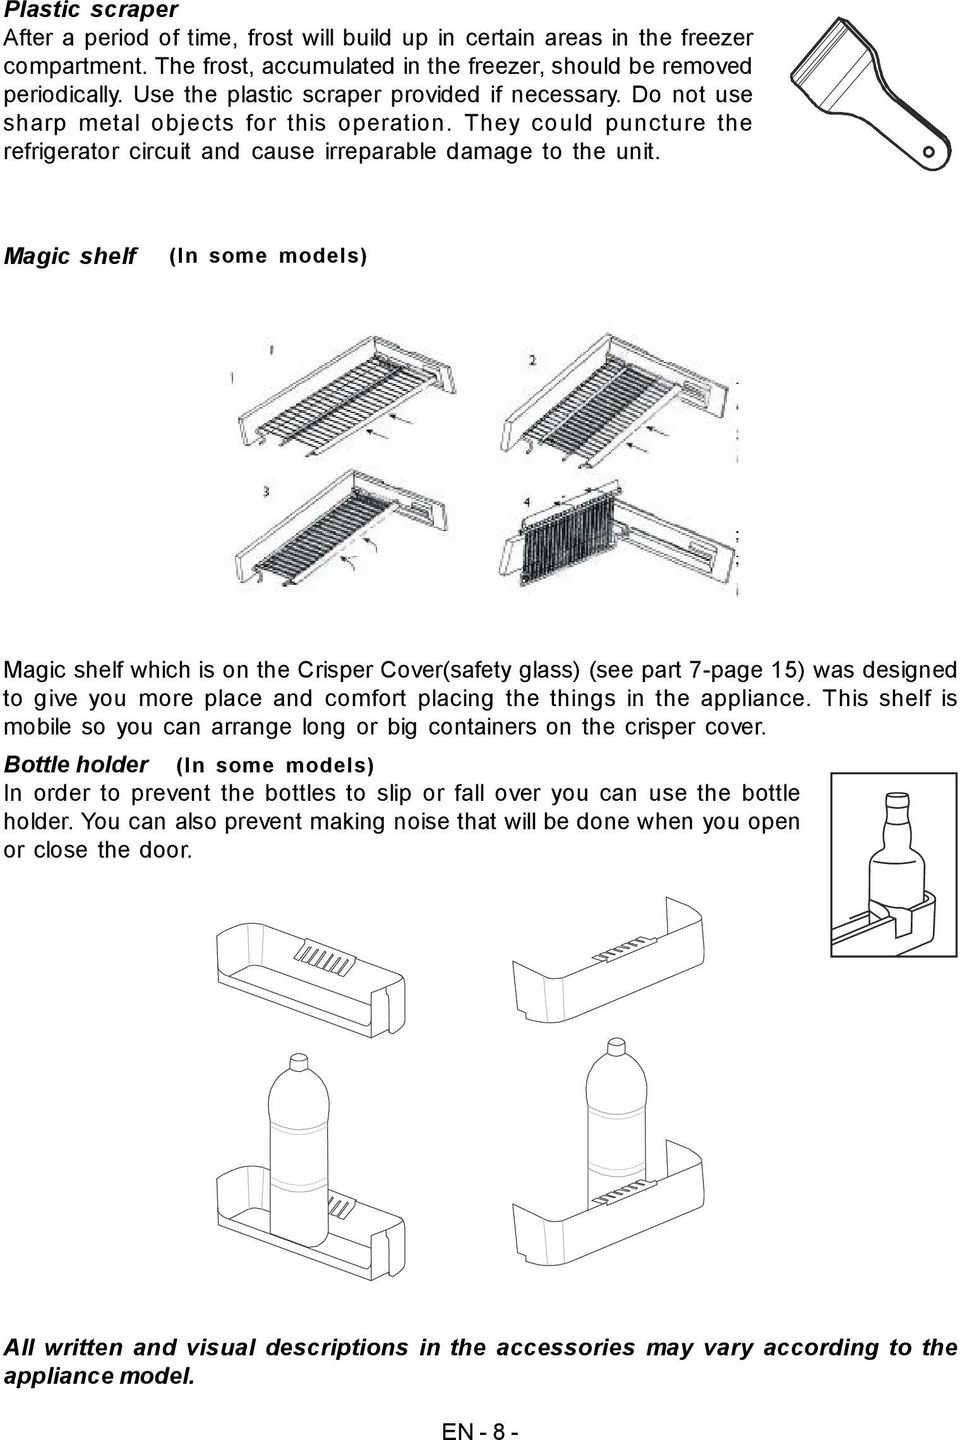 Magic shelf (In some models) Magic shelf which is on the Crisper Cover(safety glass) (see part 7-page 15) was designed to give you more place and comfort placing the things in the appliance.